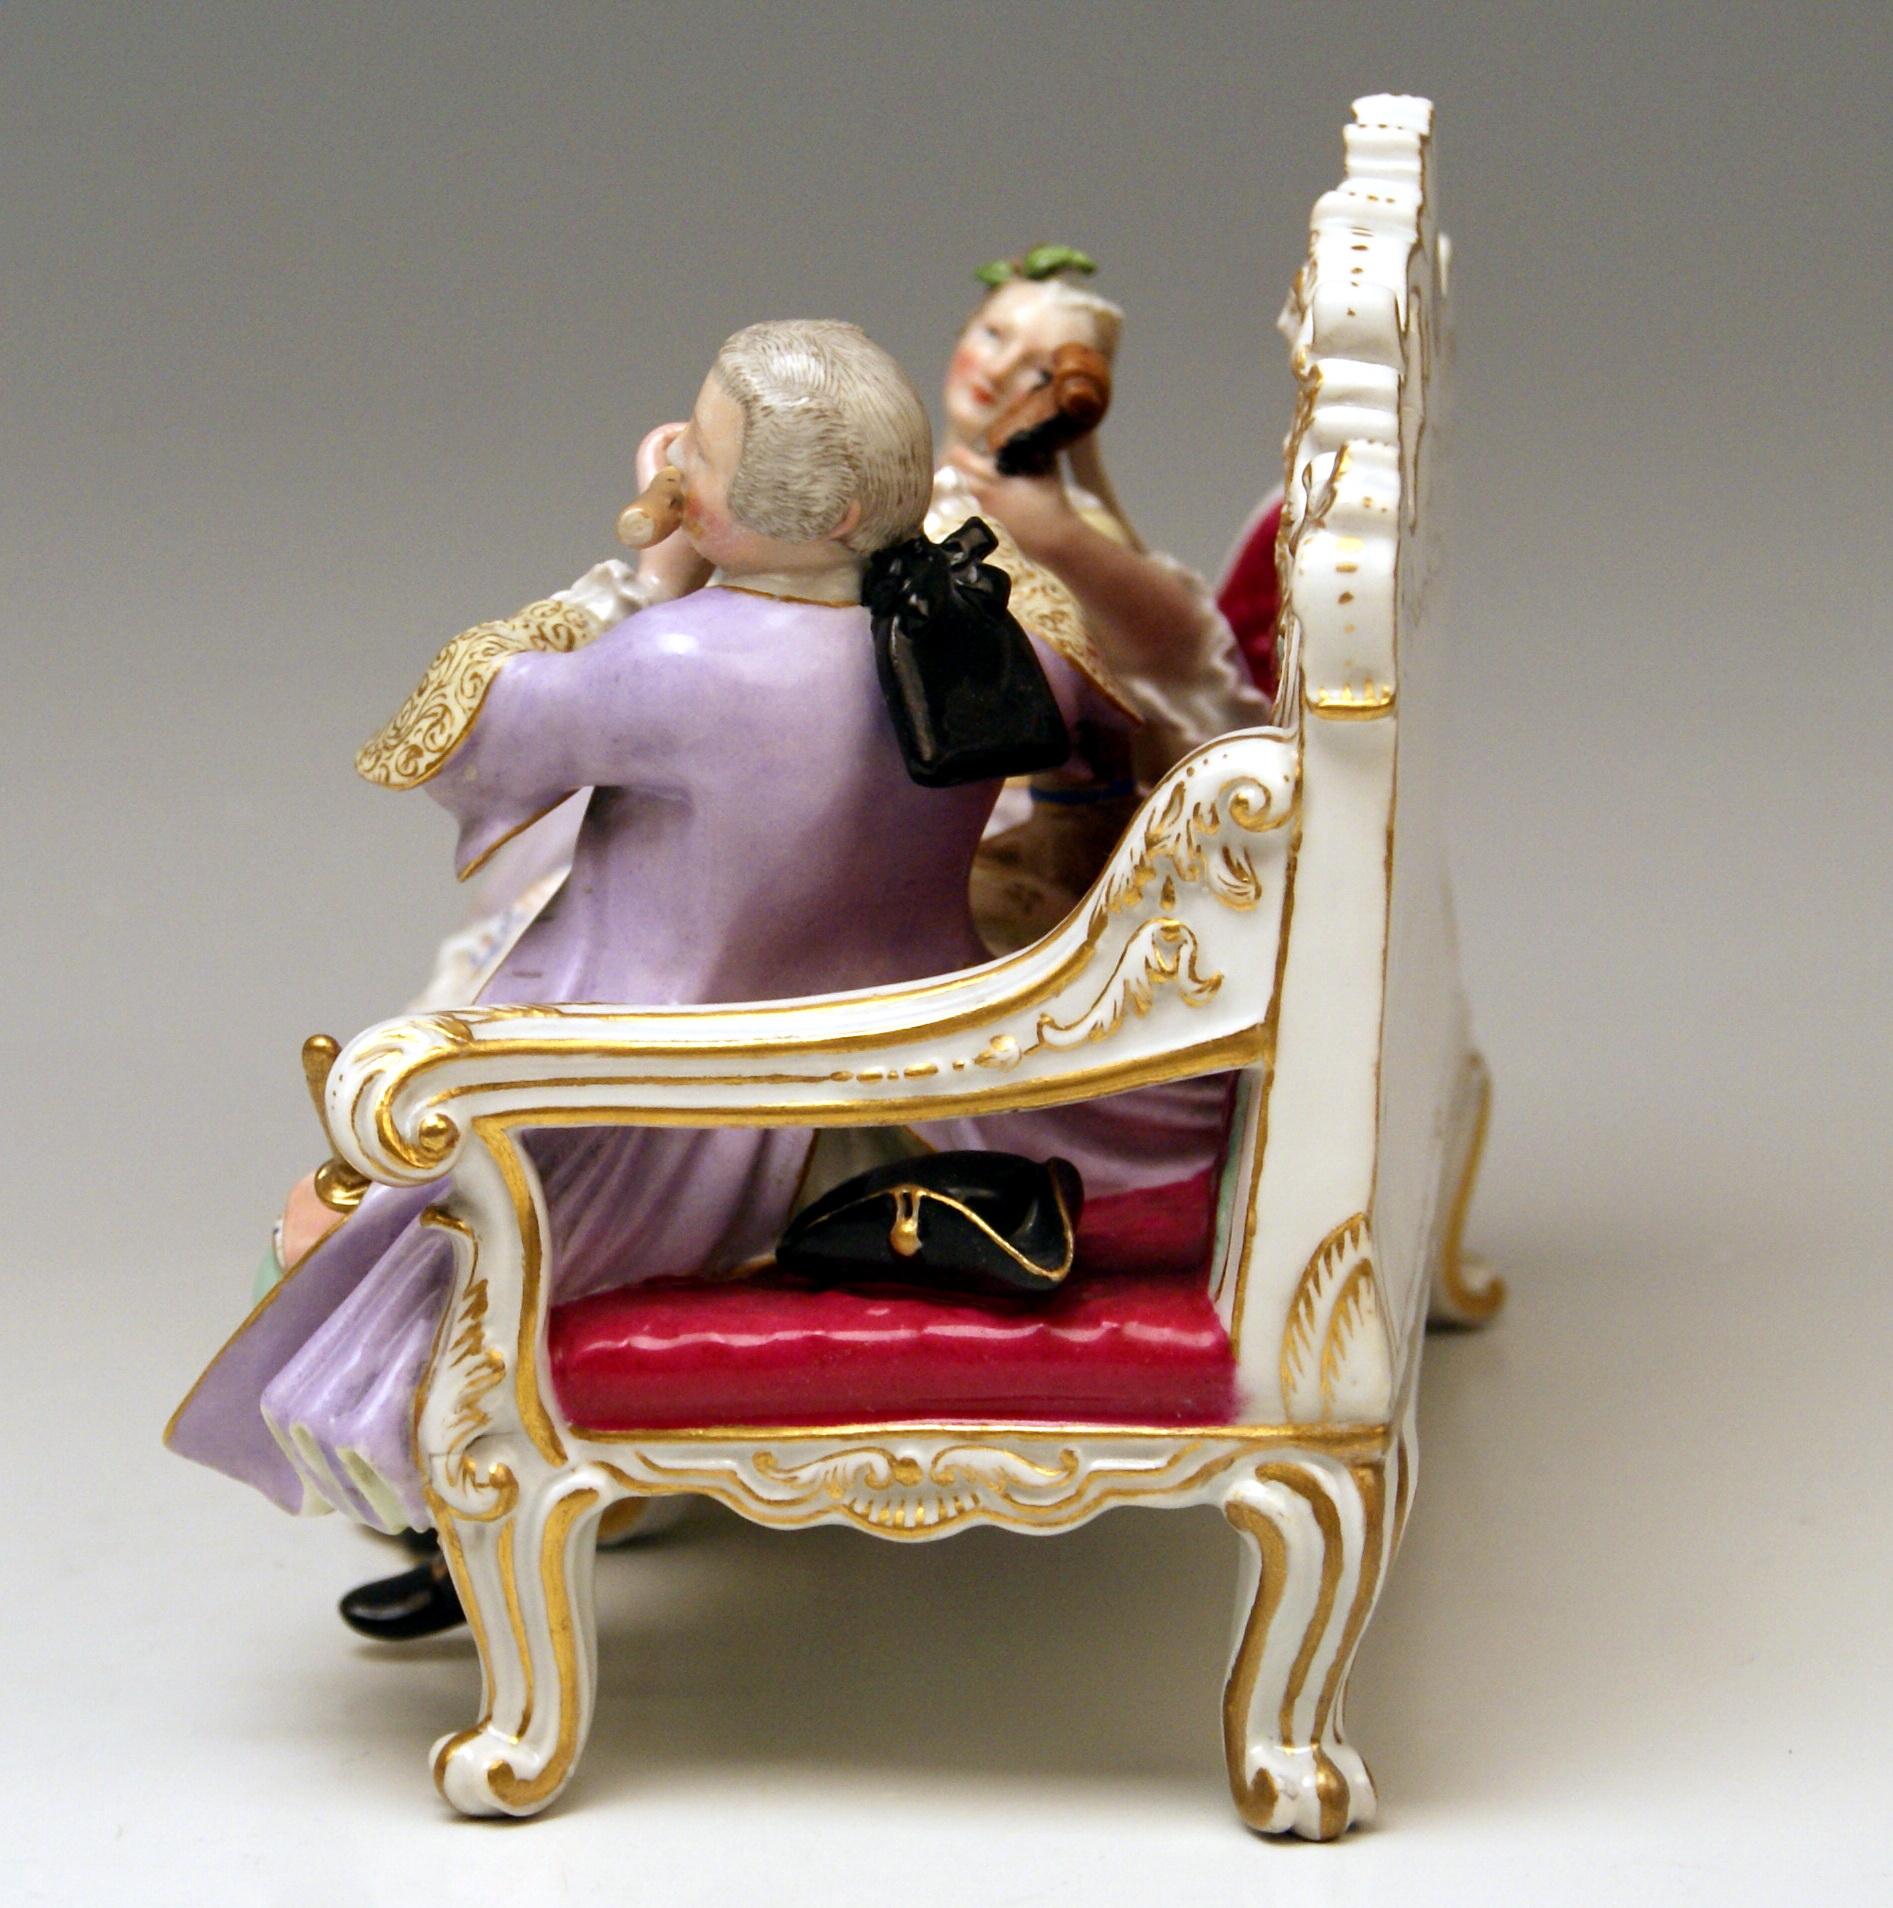 Late 19th Century Meissen Couple Musicians on Settee Pug Dog Composer Hasse W 56 Kaendler